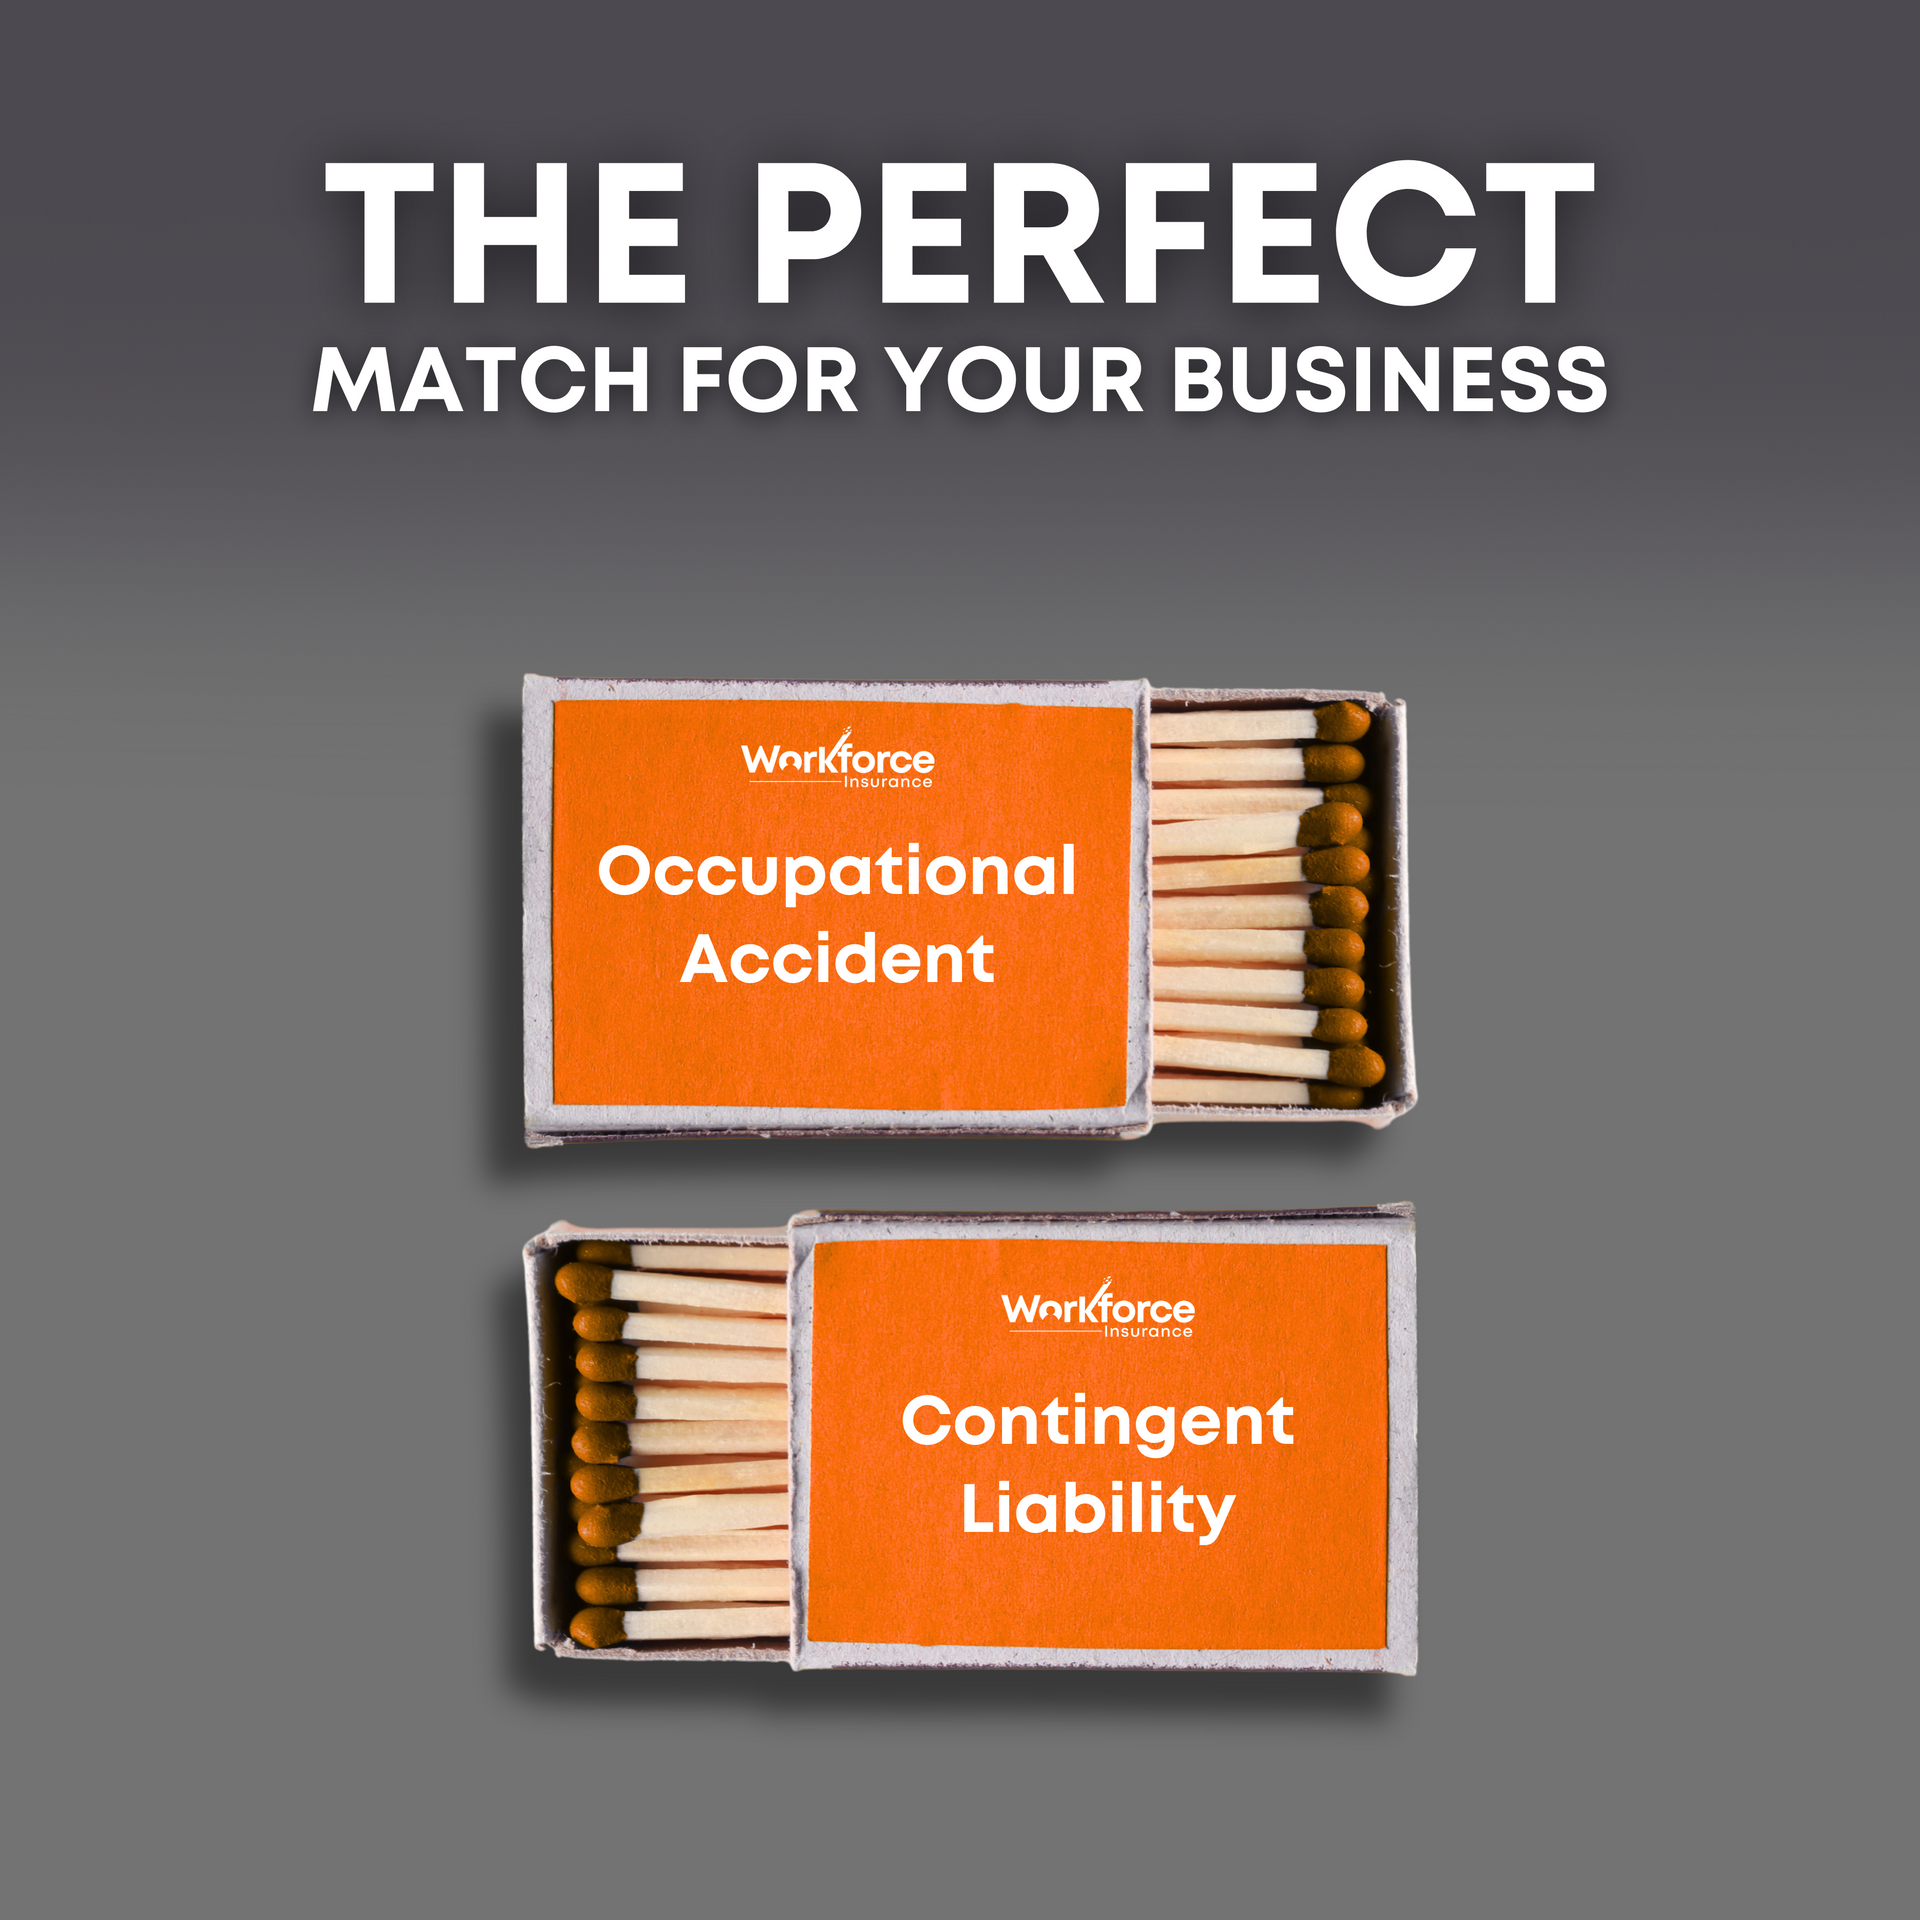 Matchstick boxes with 'Occupational Accident' and 'Contigent Liability' written on them.